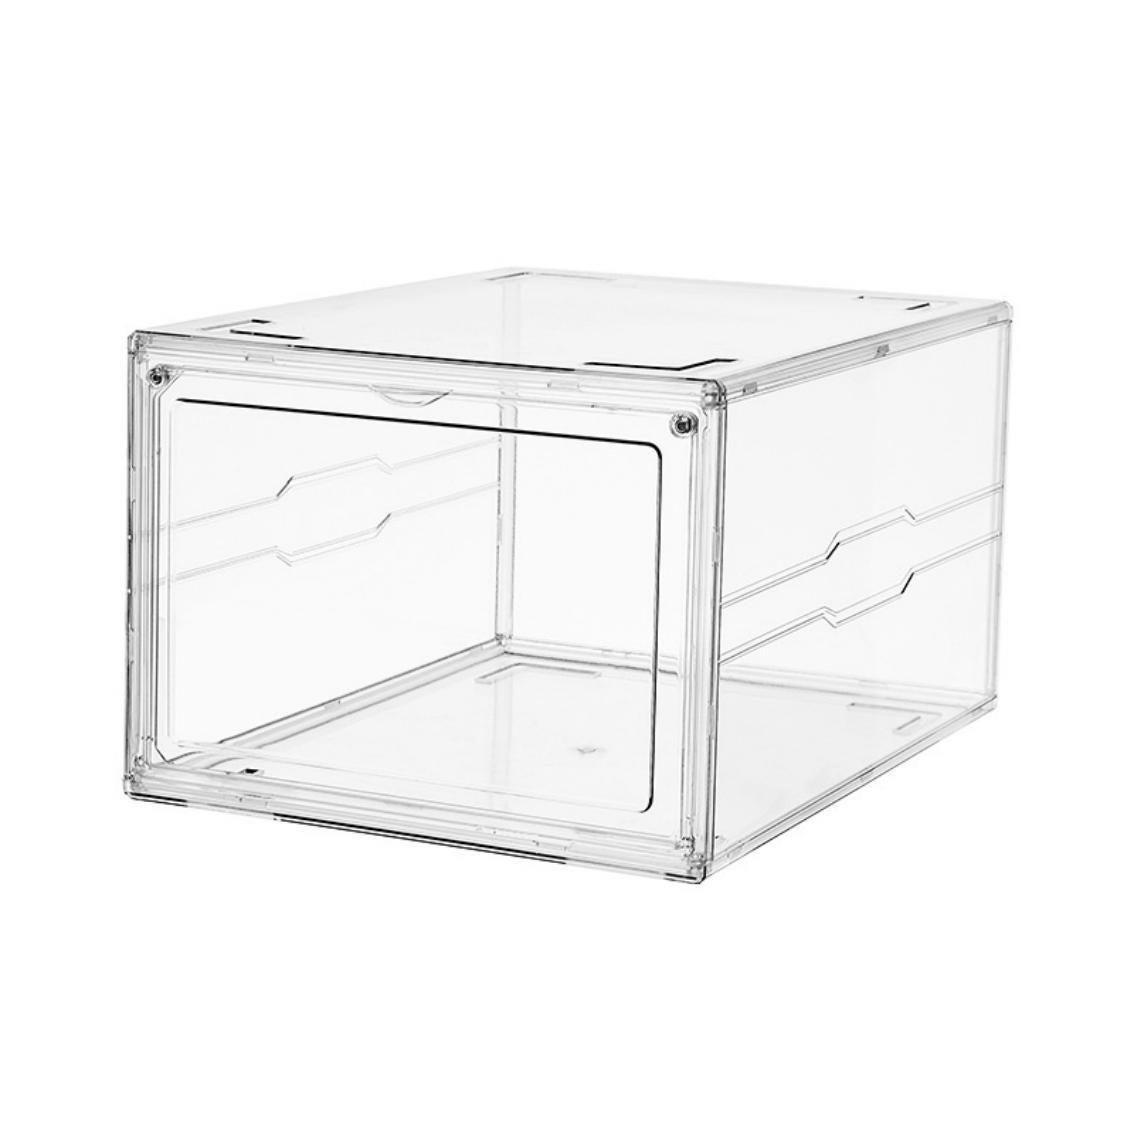 5 X Premium Sneaker Acrylic Display Shoe Box Storage Case Clear Side Open Stackable